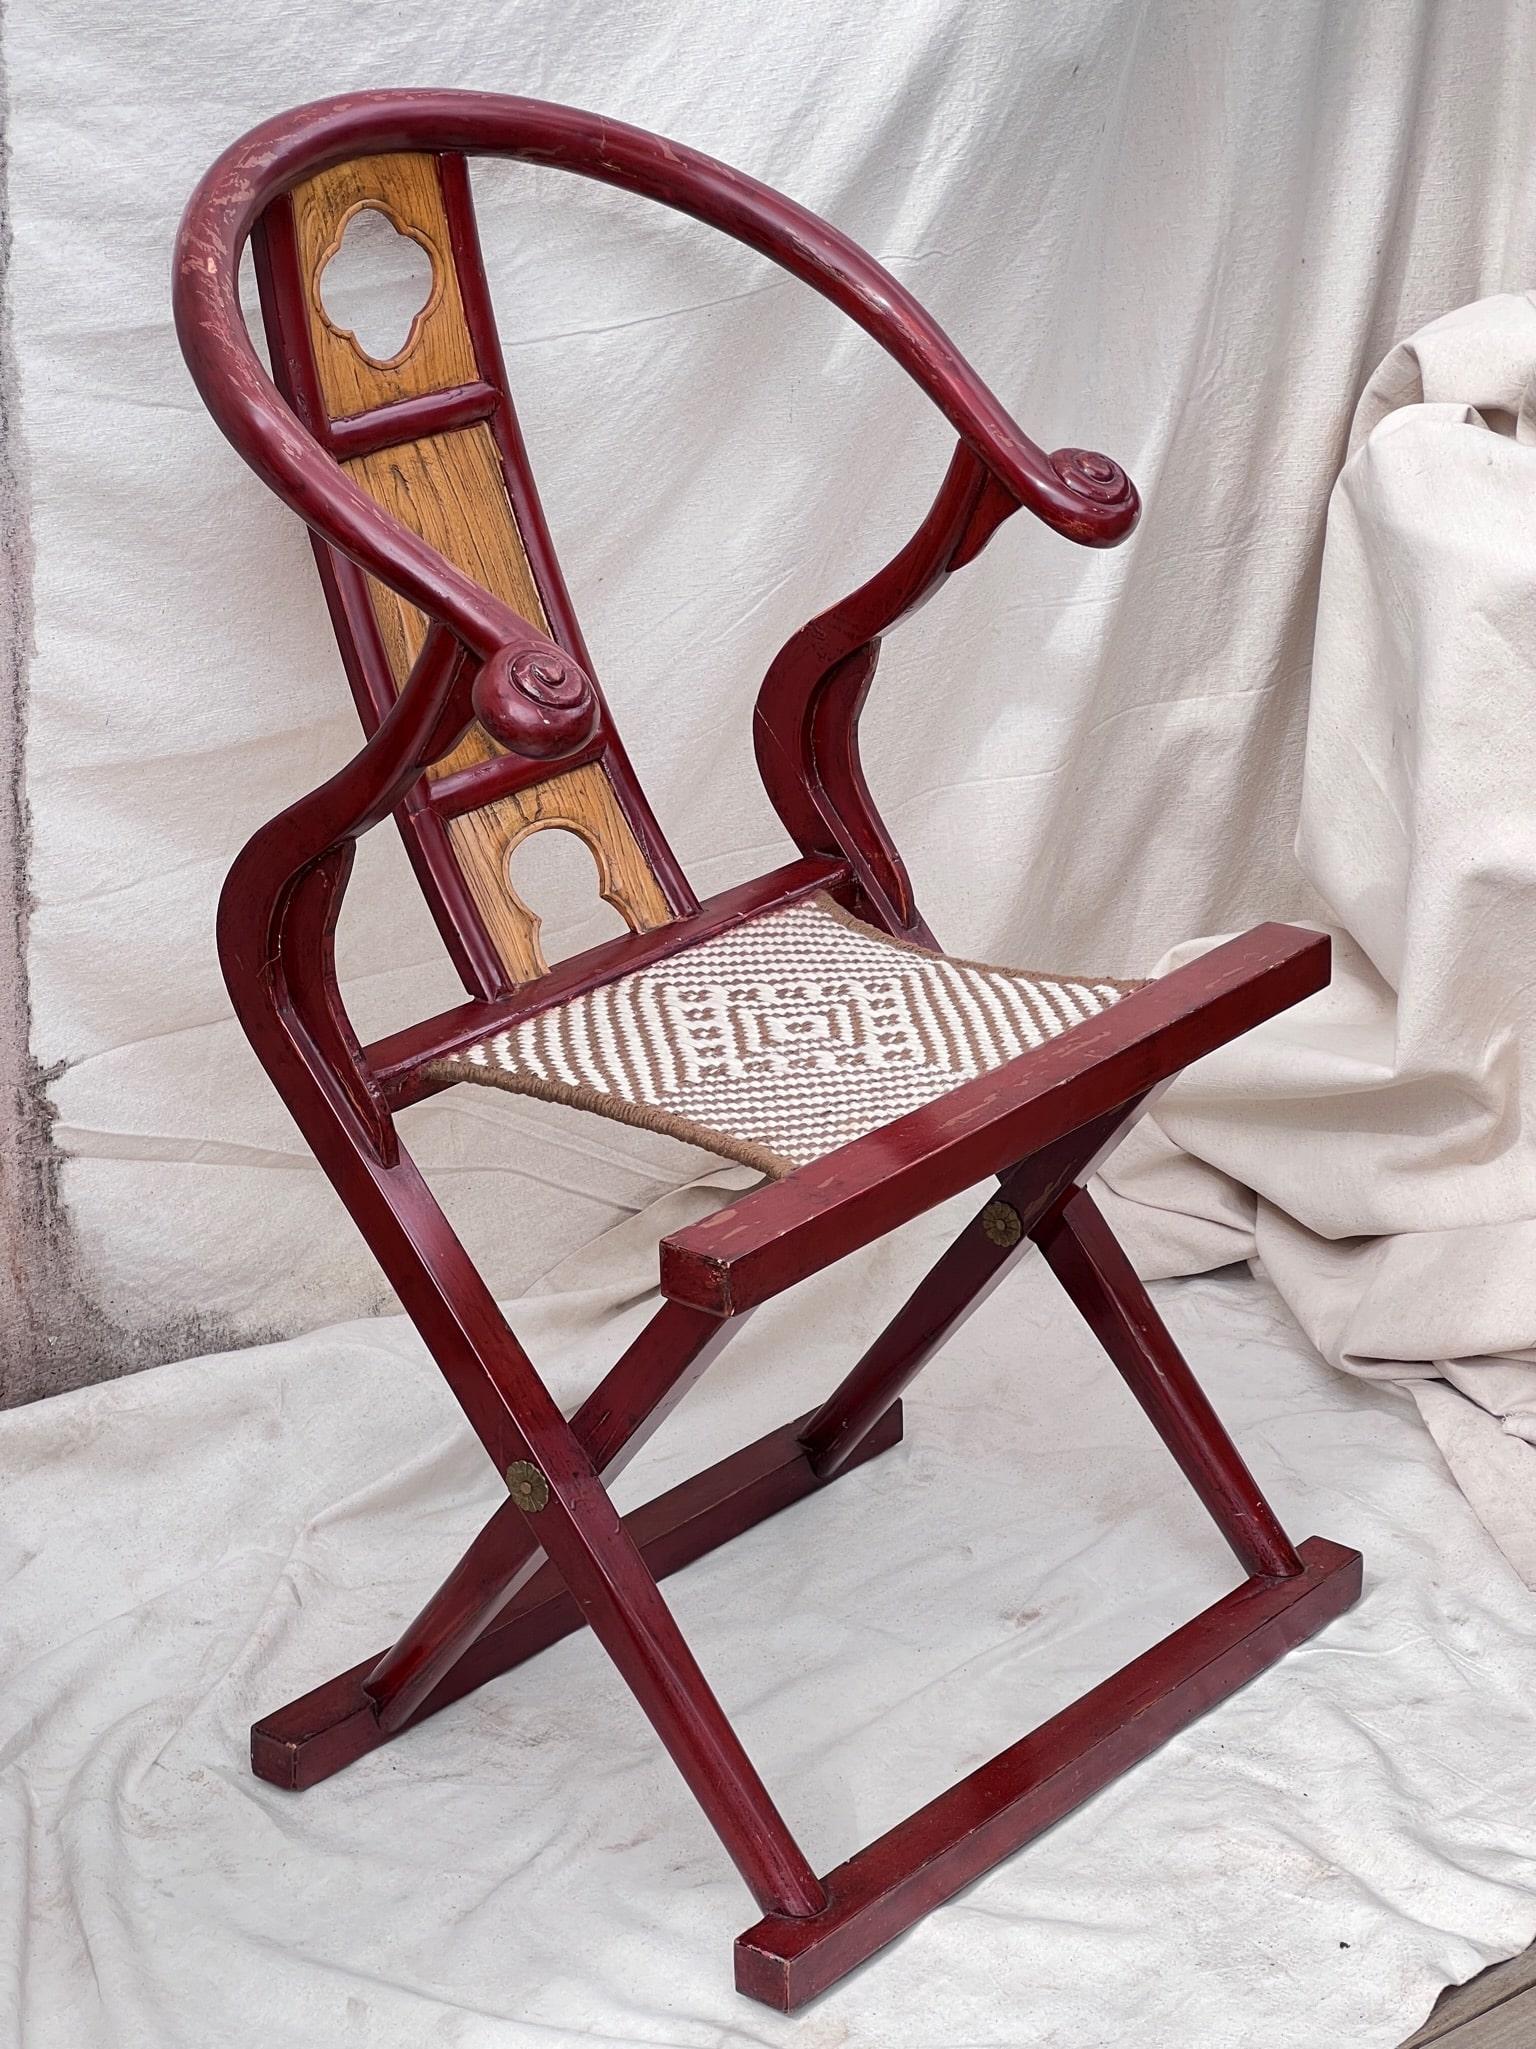 antique folding chairs styles